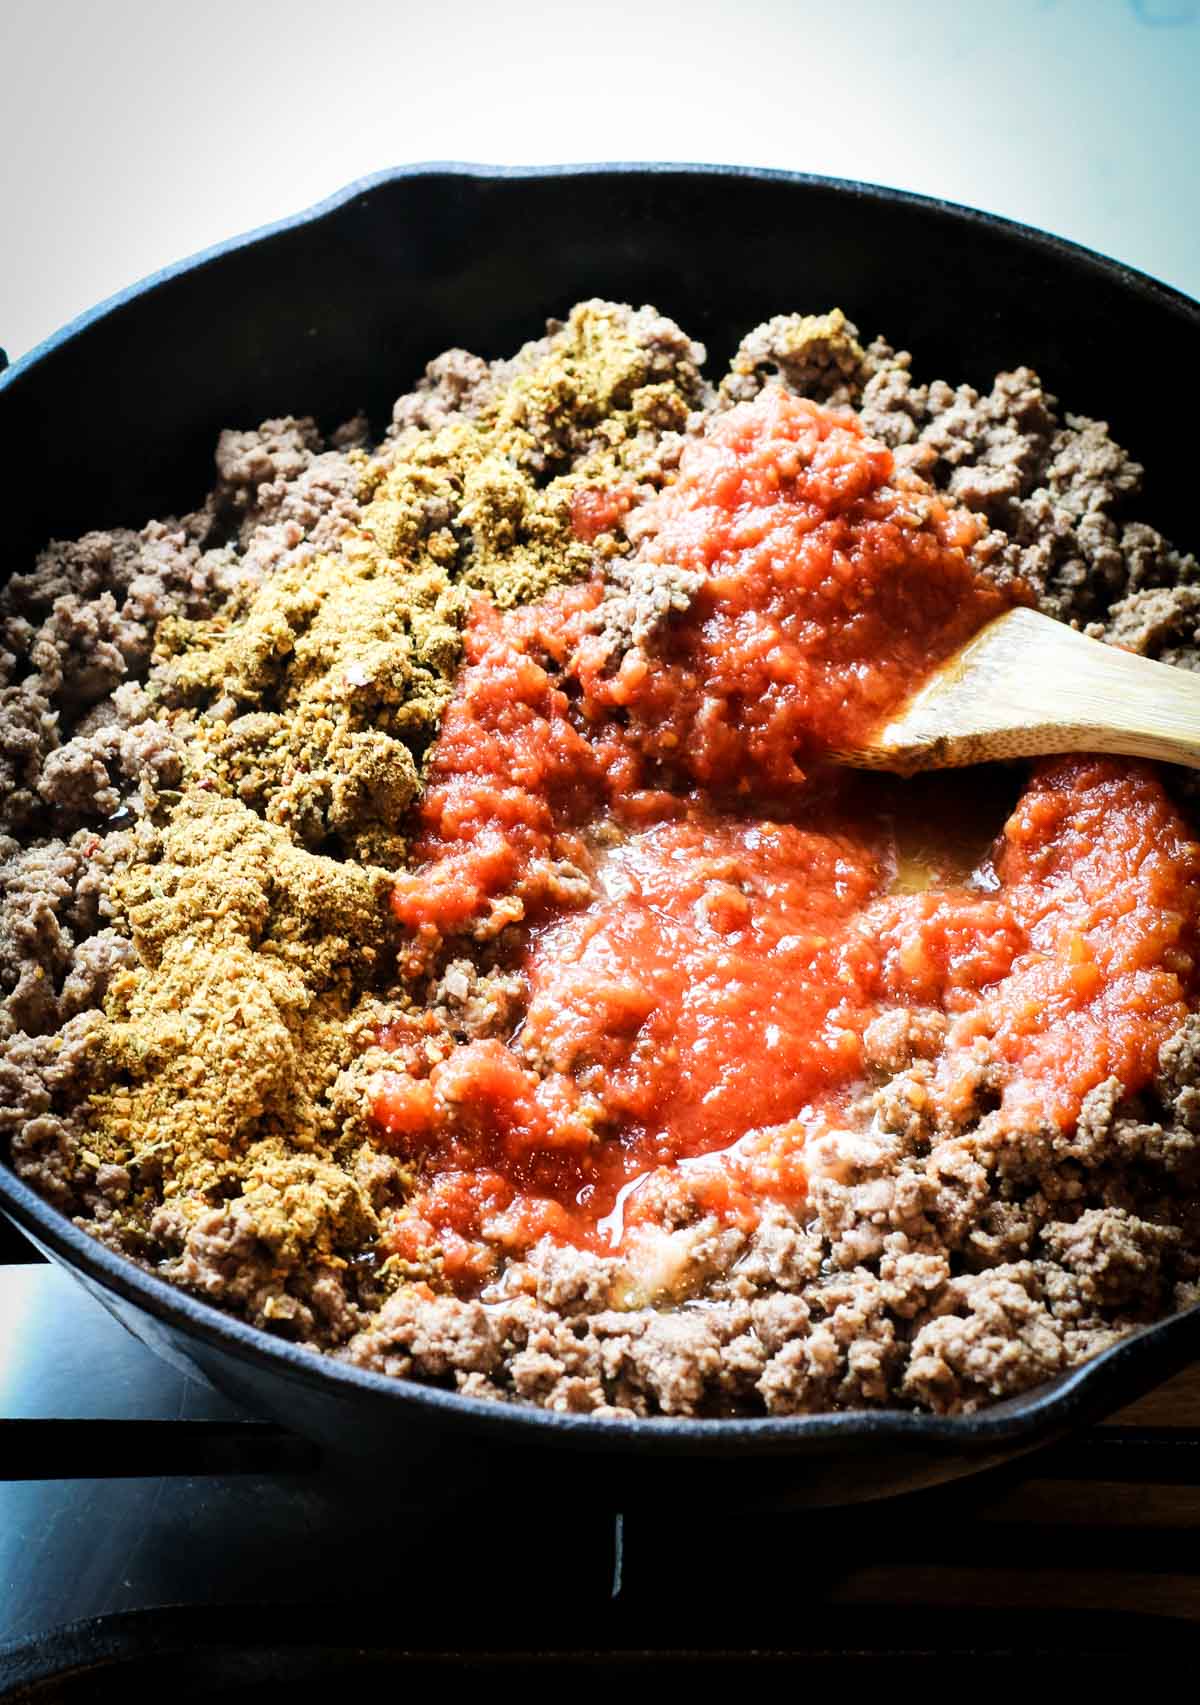 Ground beef in cast iron skillet with taco seasoning and tomato sauce over it